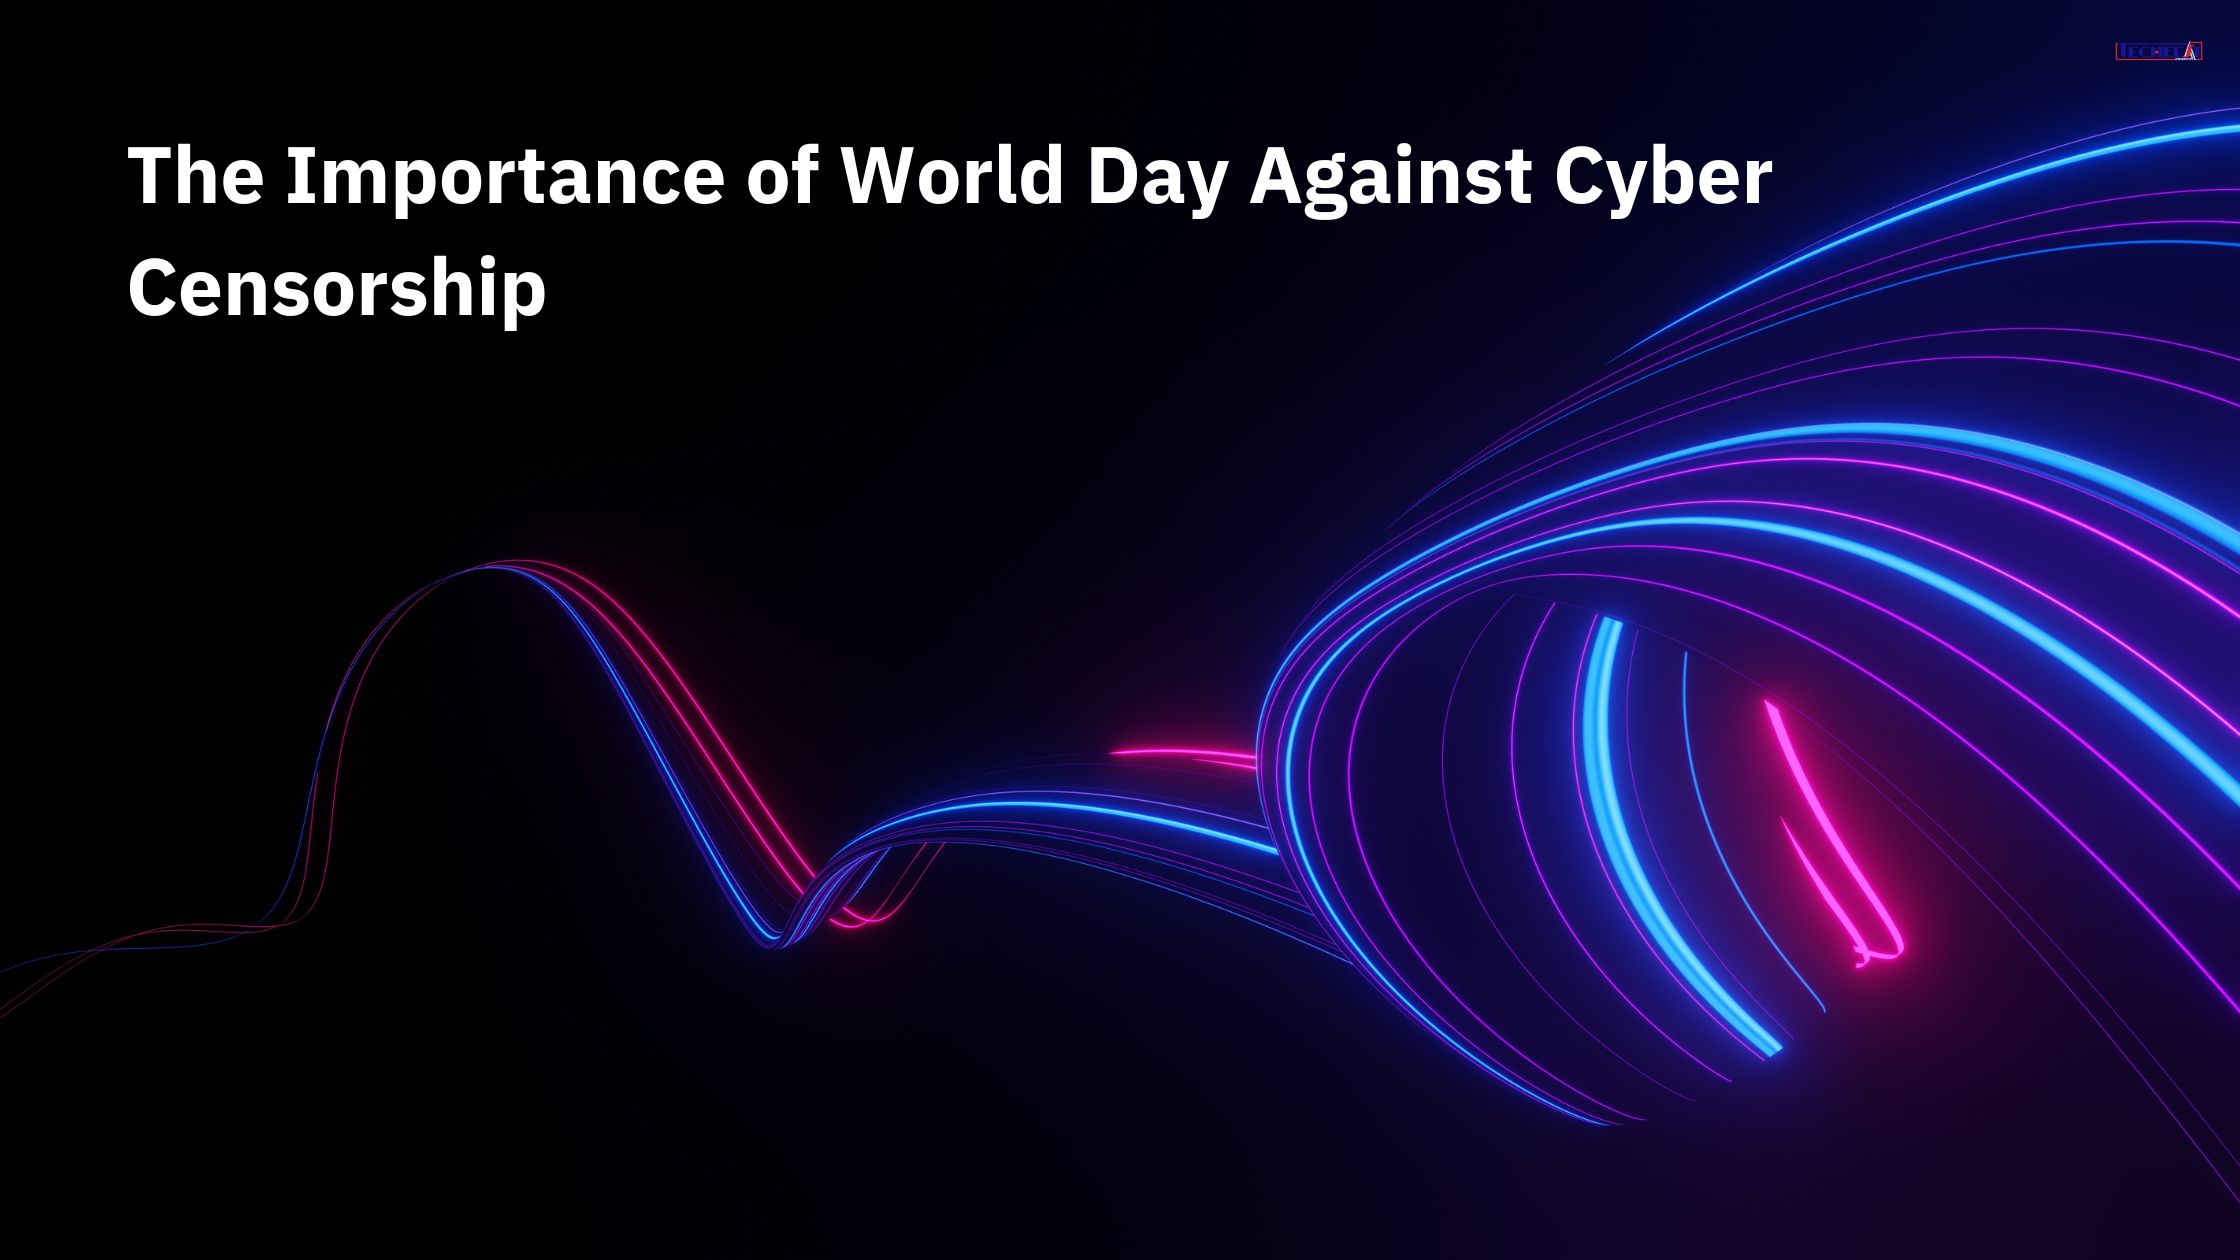 The Importance of World Day Against Cyber Censorship